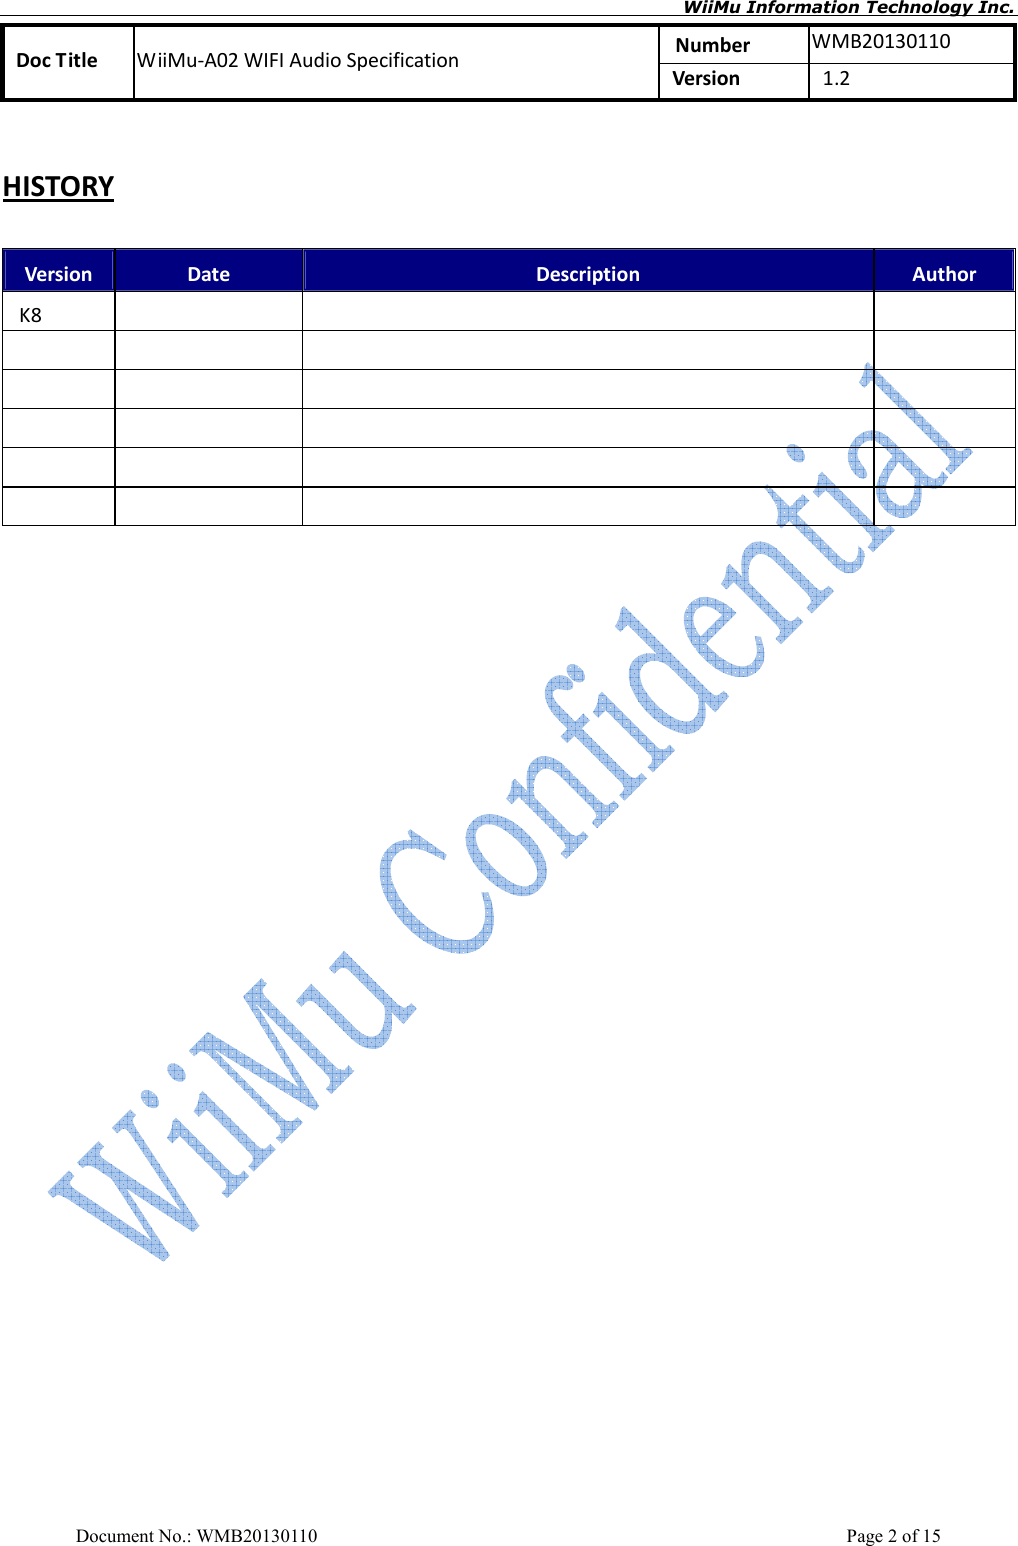       WiiMu Information Technology Inc. Number  WMB20130110 Doc Title  WiiMu-A02 WIFI Audio Specification  Version    1.2  Document No.: WMB20130110    Page 2 of 15 HISTORY Version  Date  Description  Author K8                                           